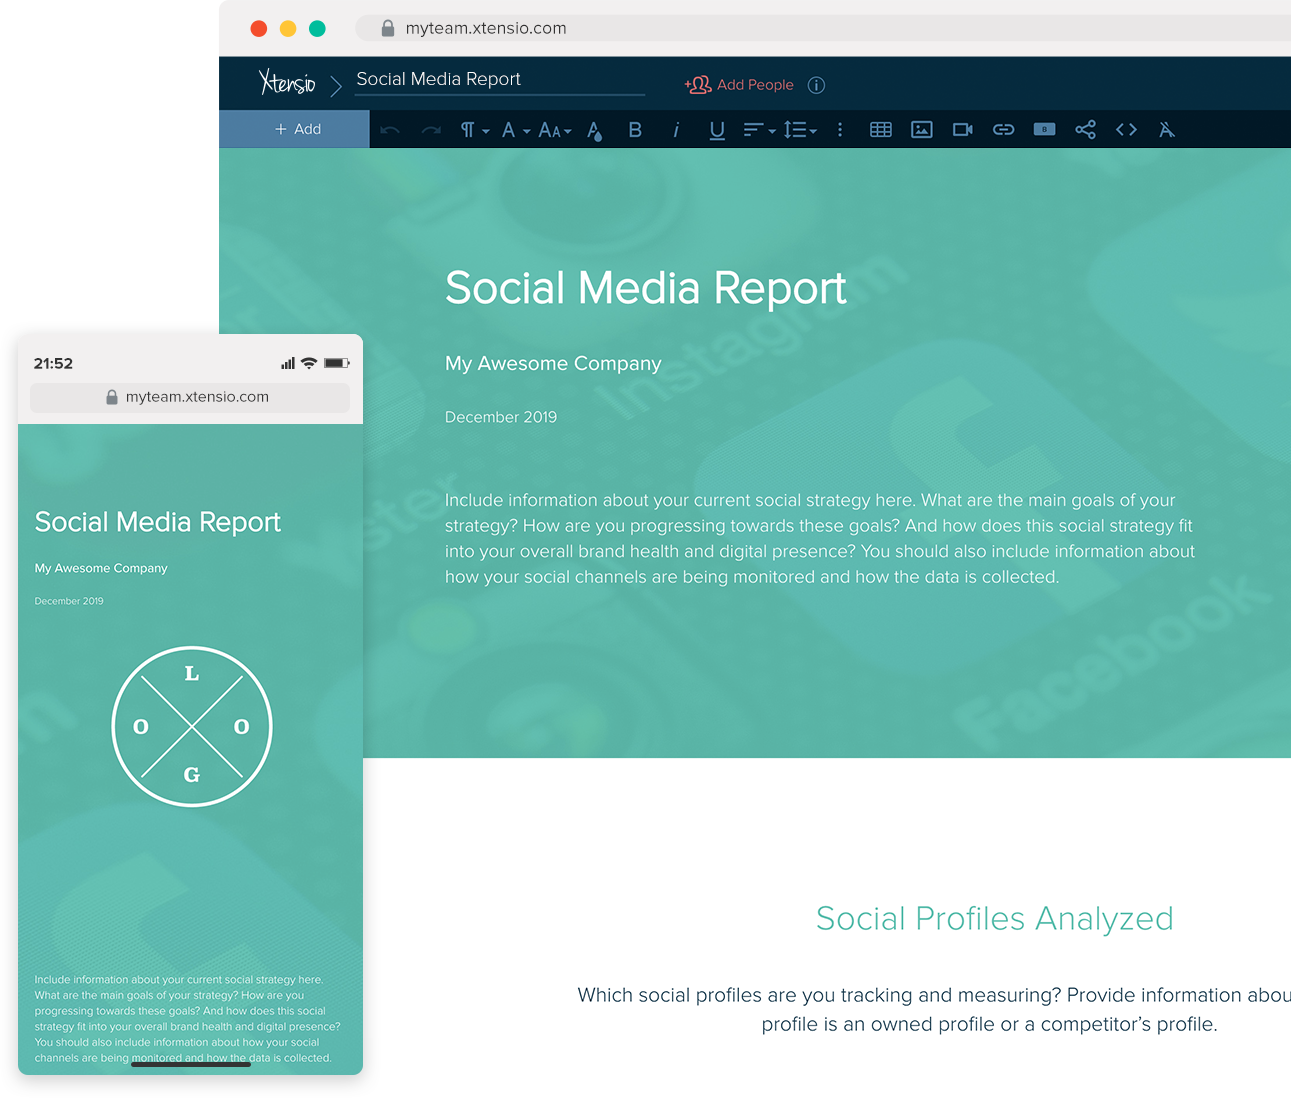 How To Create a Social Media Report: A Step-by-Step Guide